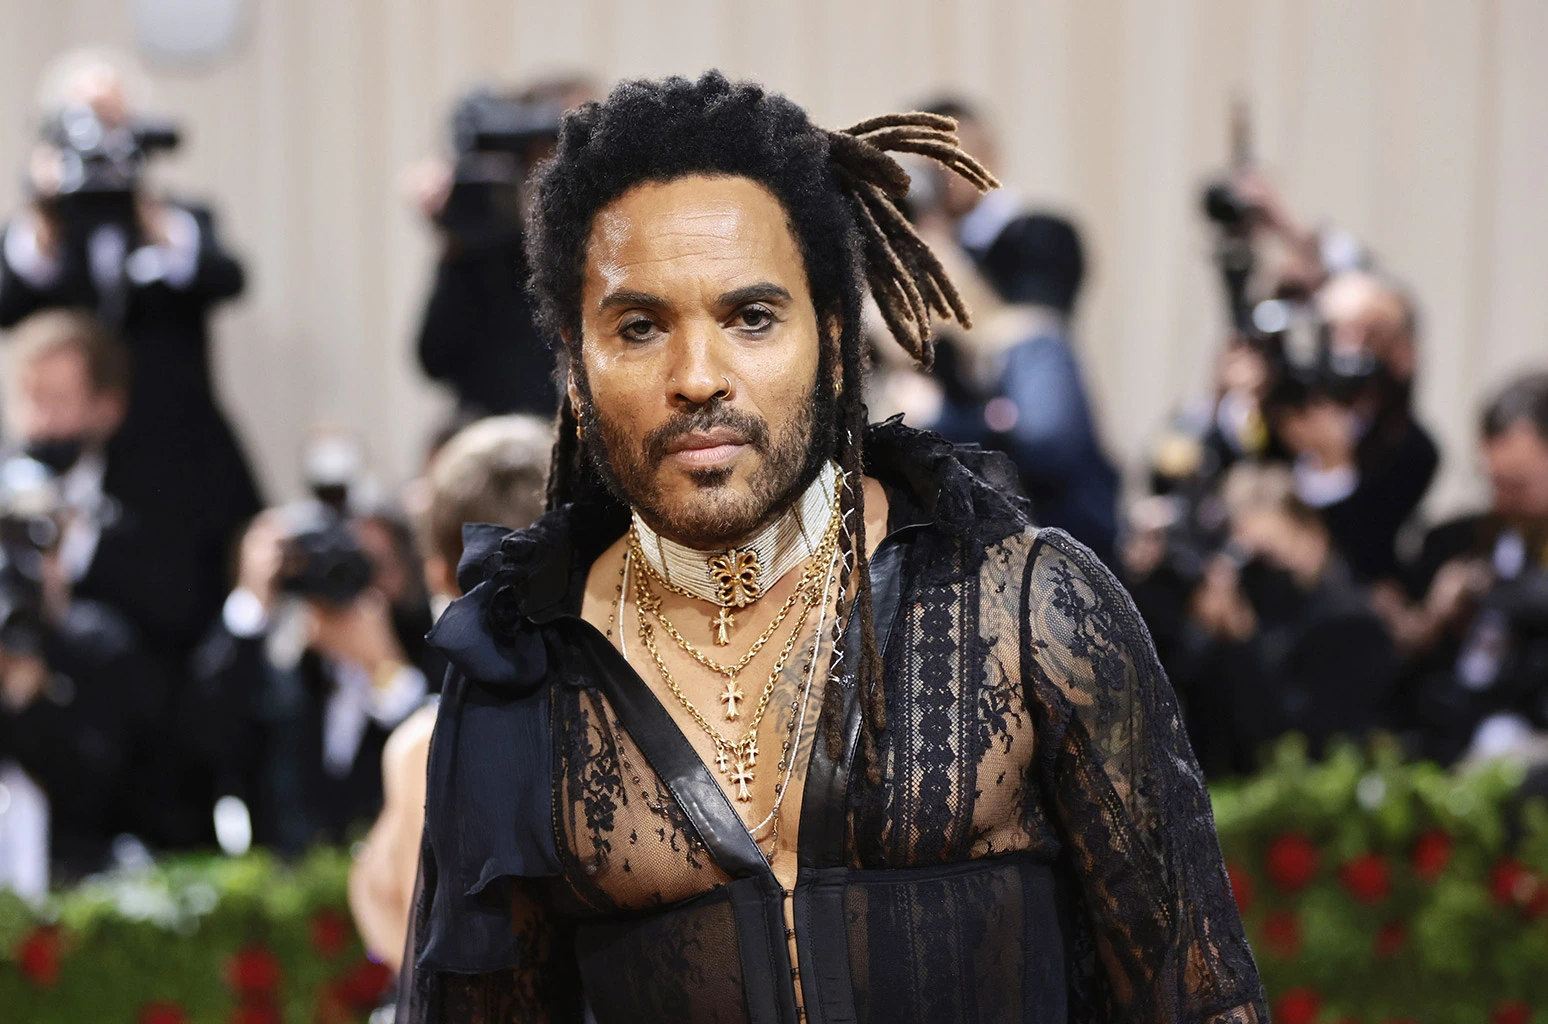 Lenny Kravitz Clarifies Comments on Feeling Like He Is ‘Not Celebrated’: ‘Referring to Black Award Shows’